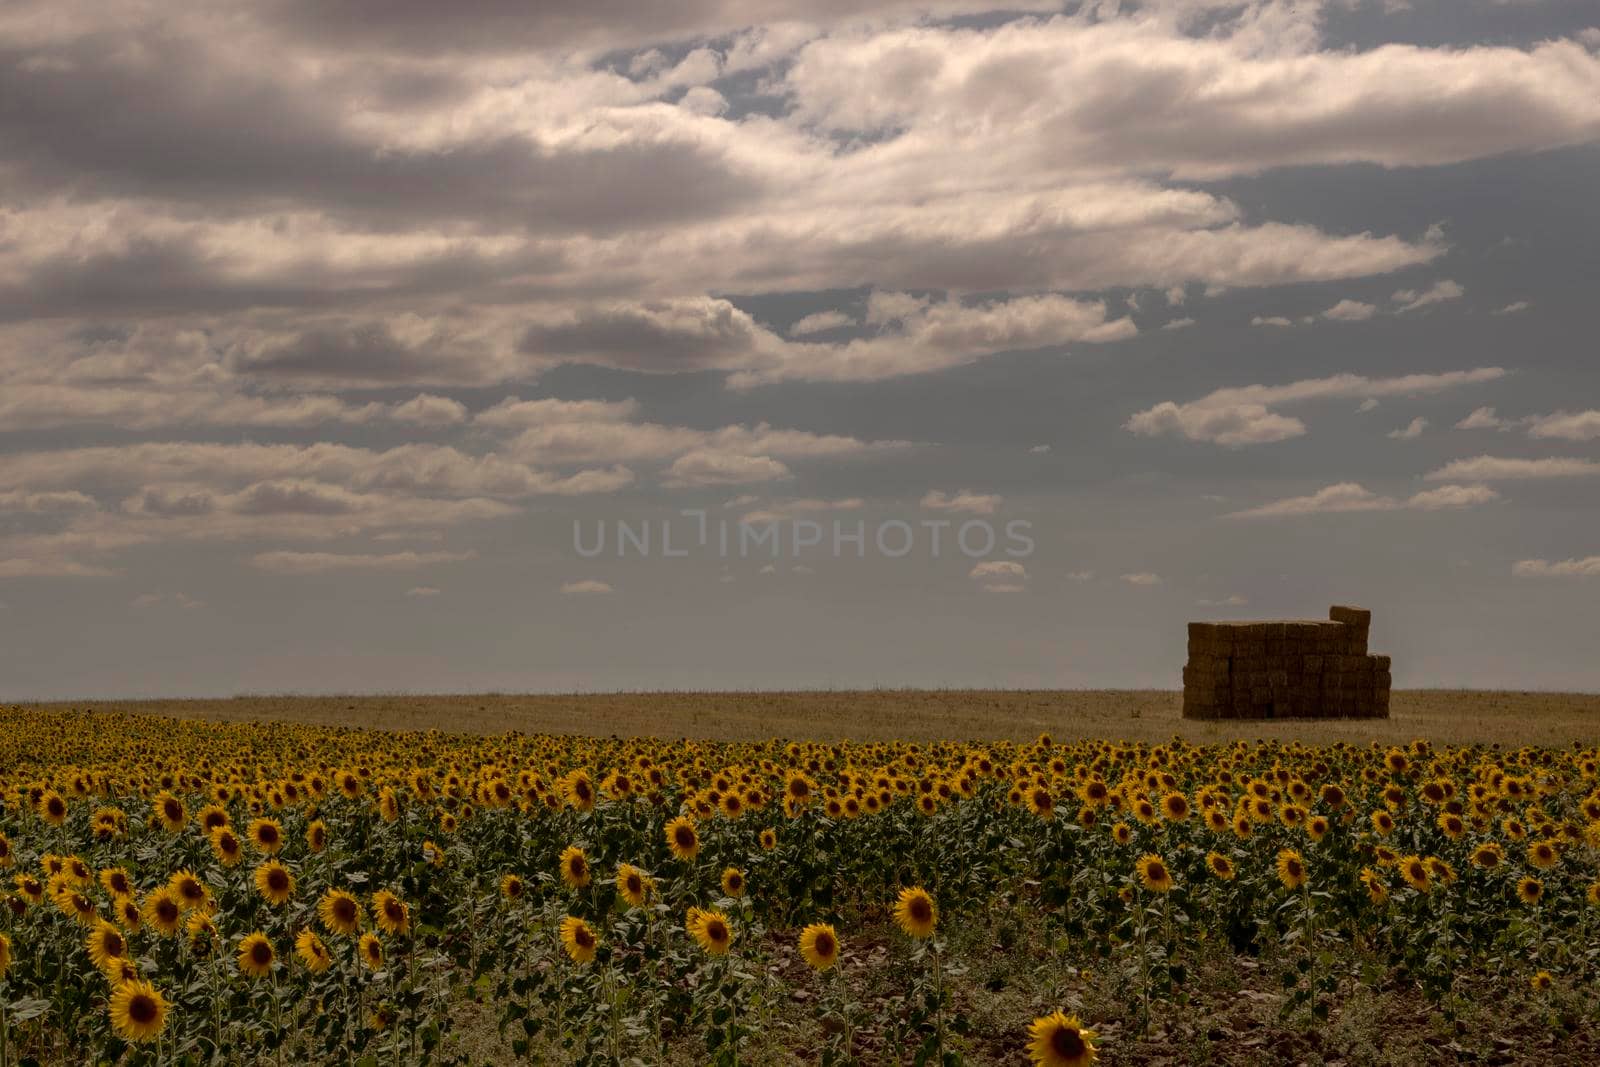 Landscape showing sunflowers and some straw blocks under a cloudy sky in the countryside